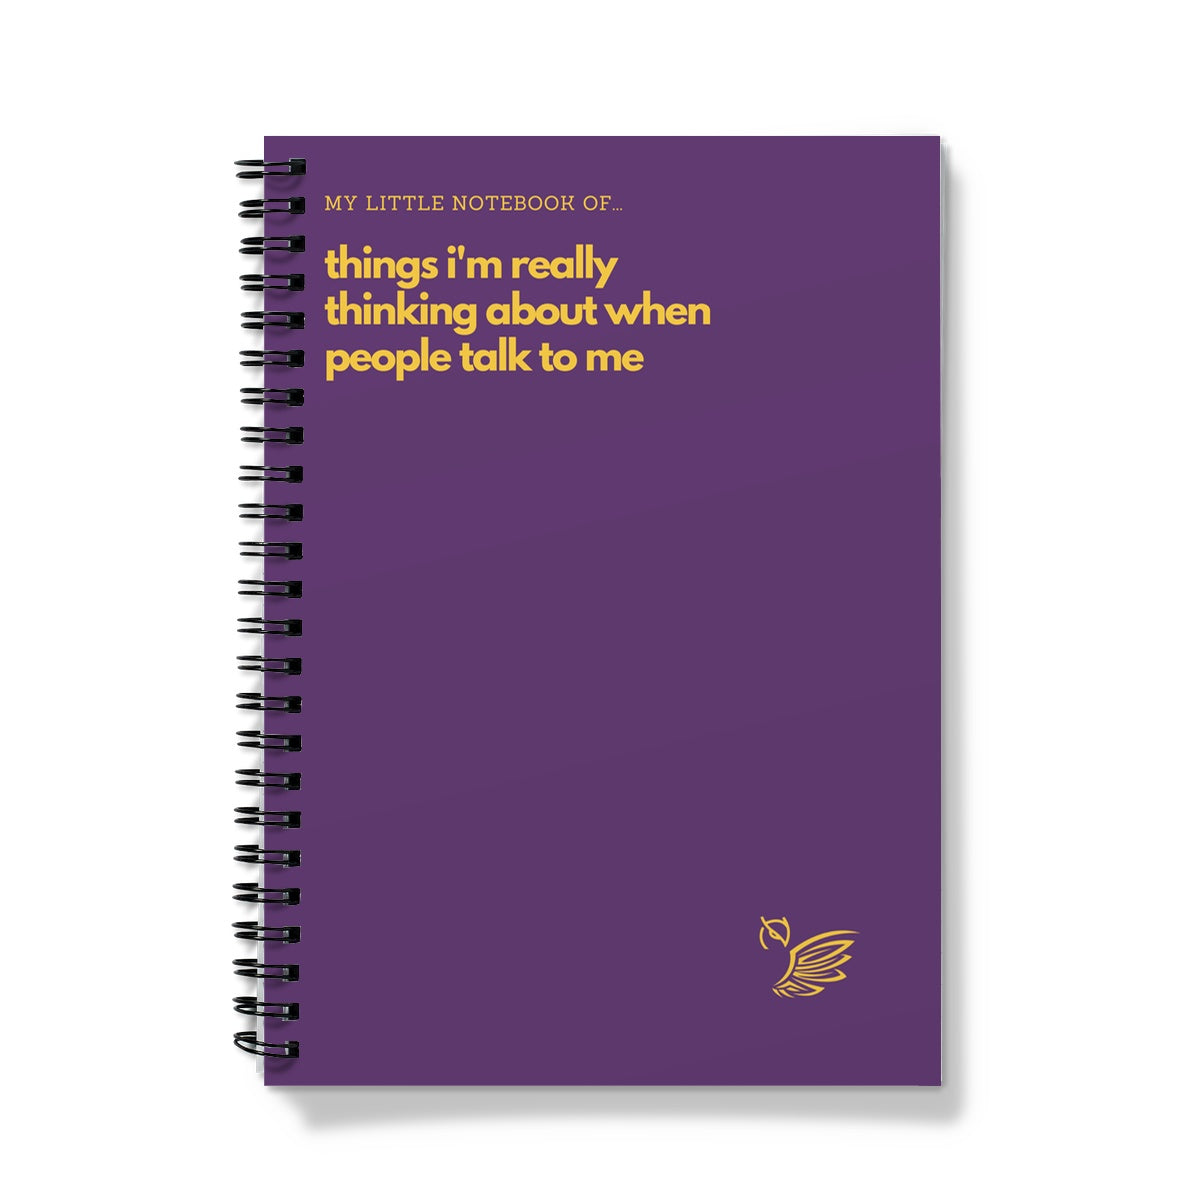 My Little Notebook Of... Things I'm Really Thinking About When People Talk To Me Notebook